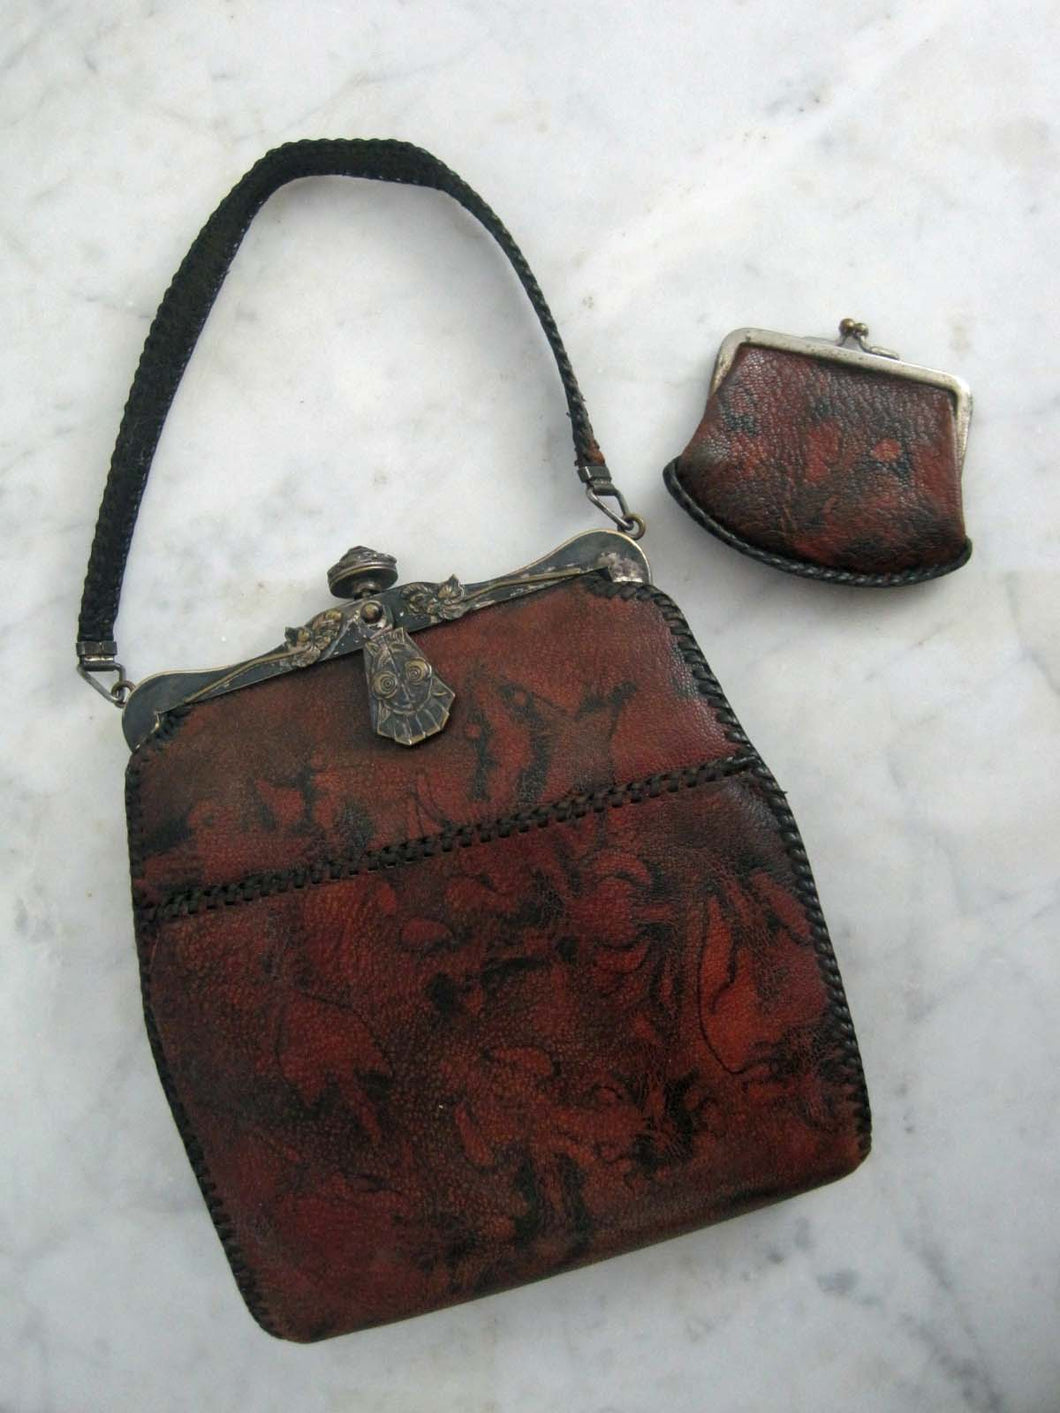 Antique 1918 Handbag & Matching Coin Purse / Art Deco Leather Purse / Dyed Marble Leather / JEMCO Locking Purse Frame Roses Ruby Glass